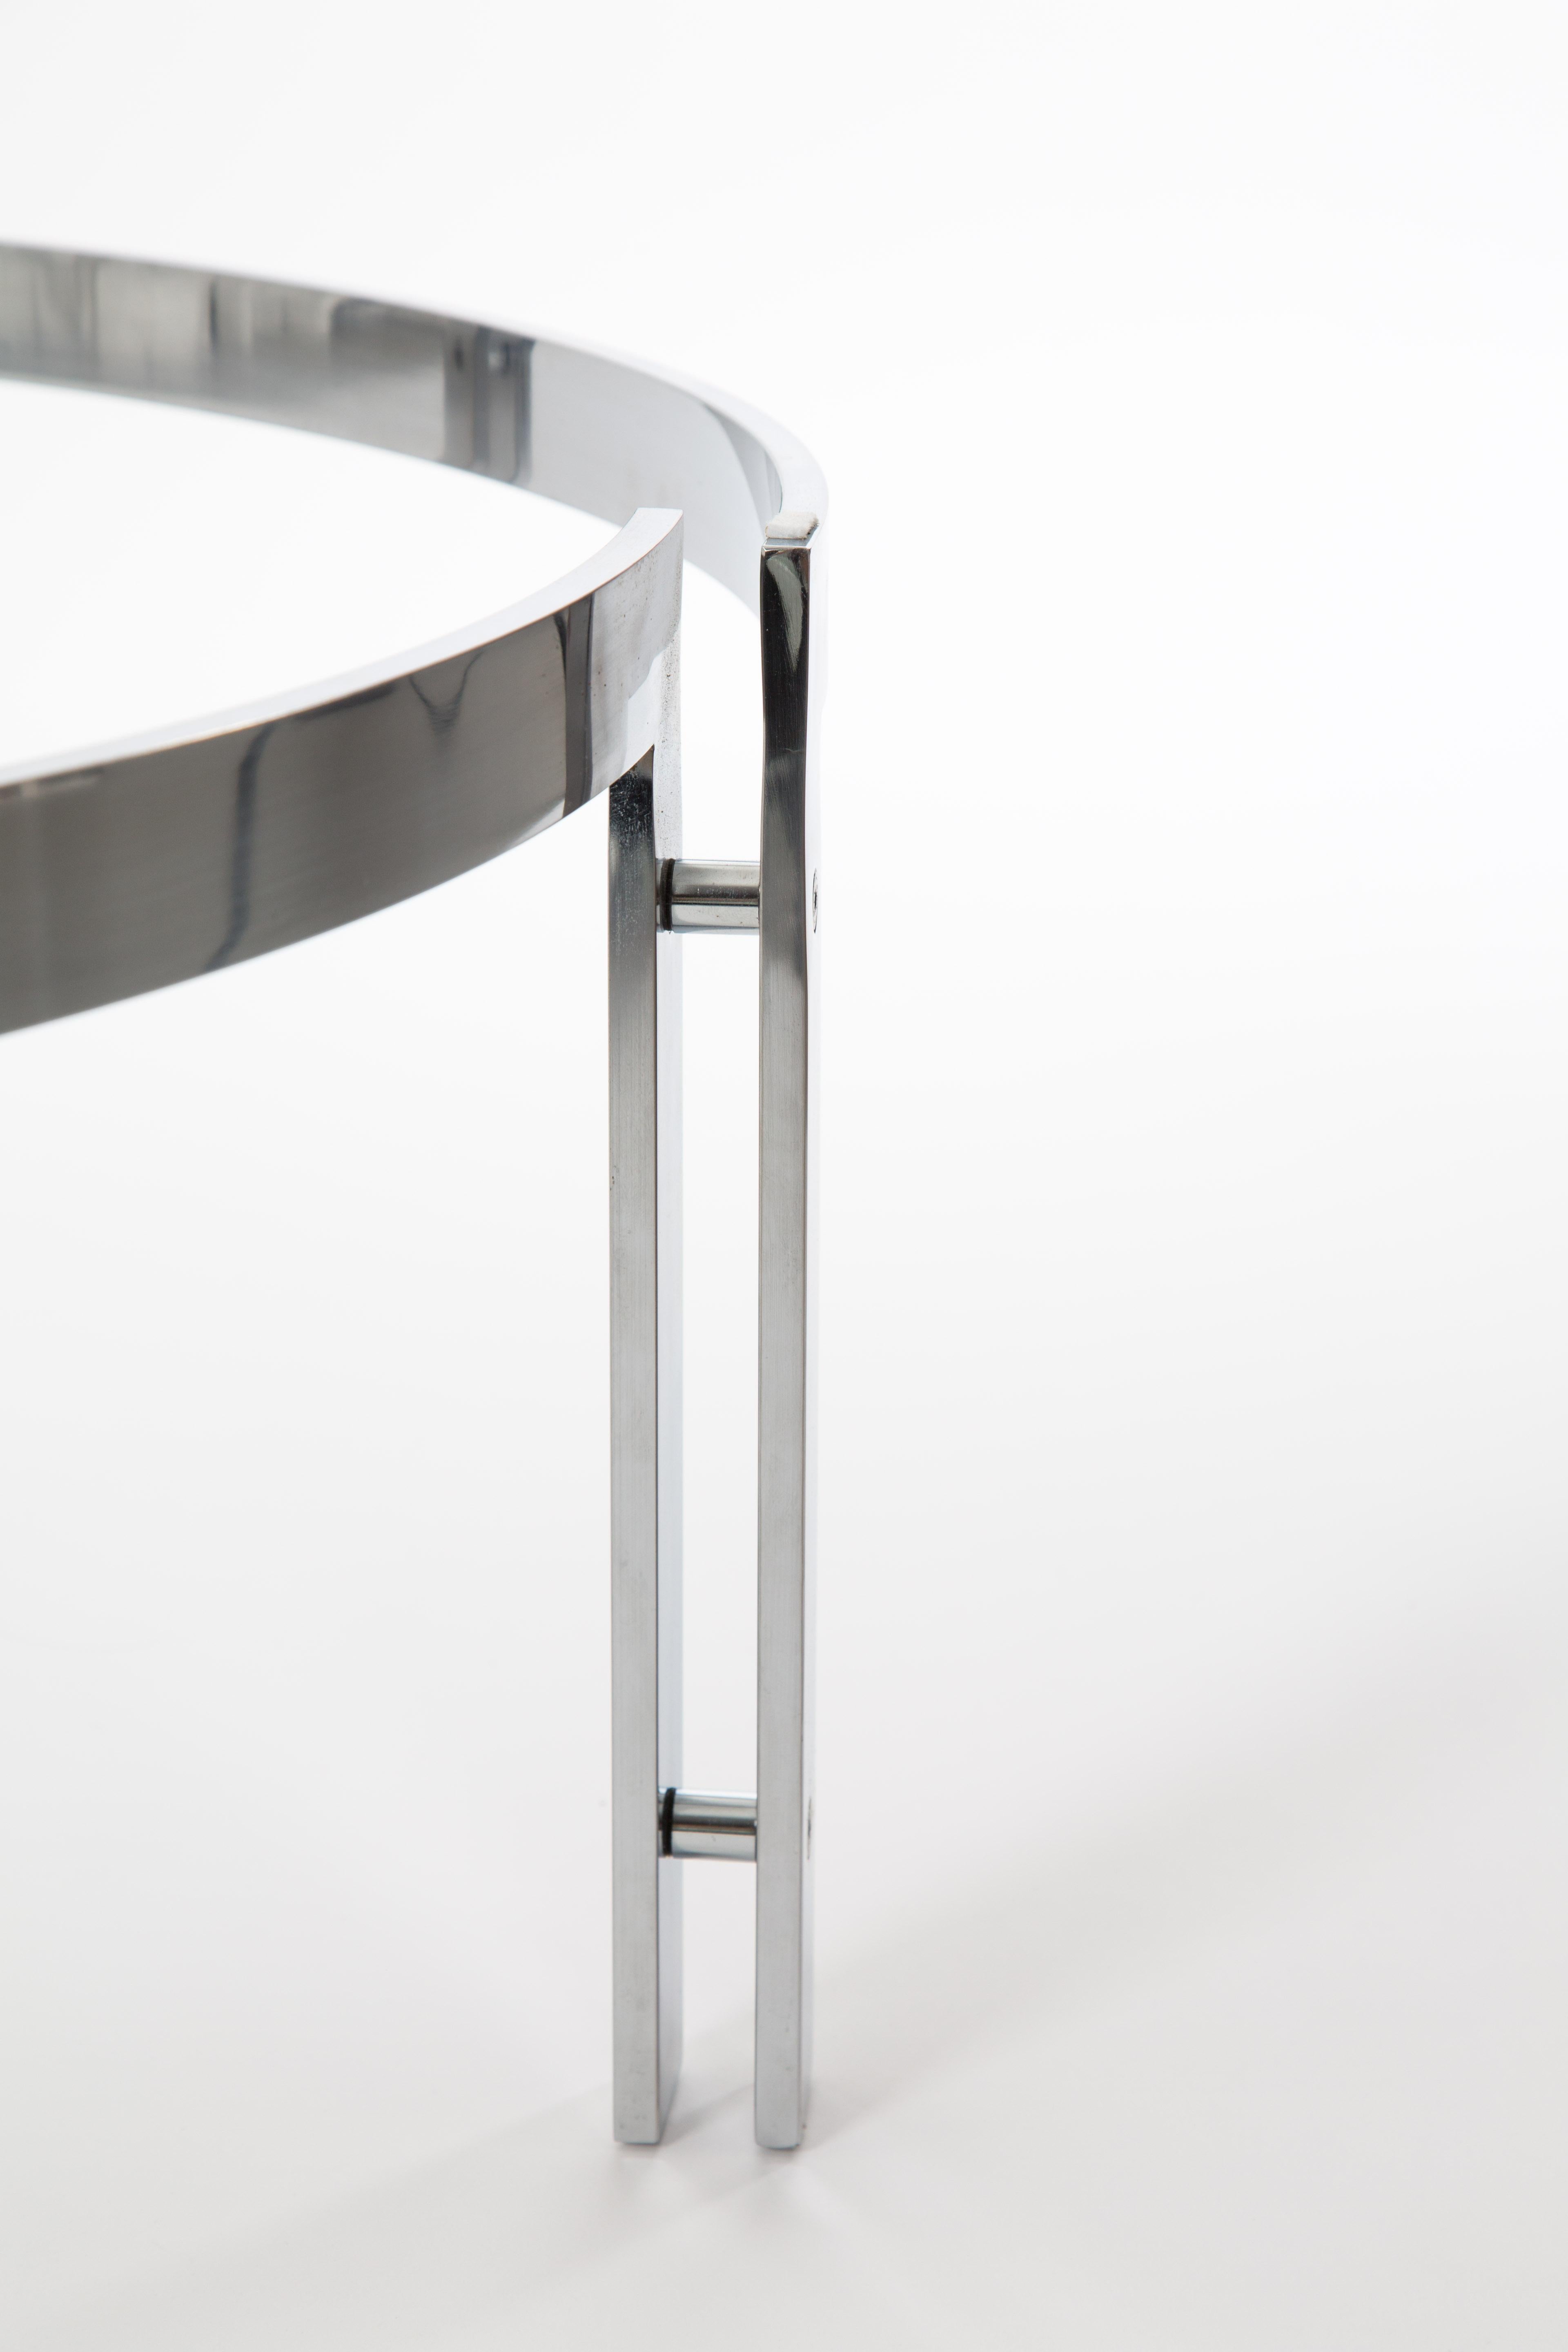 Metaform Round Glass Table with Steel Frame in the Style of Kjaerholm 7